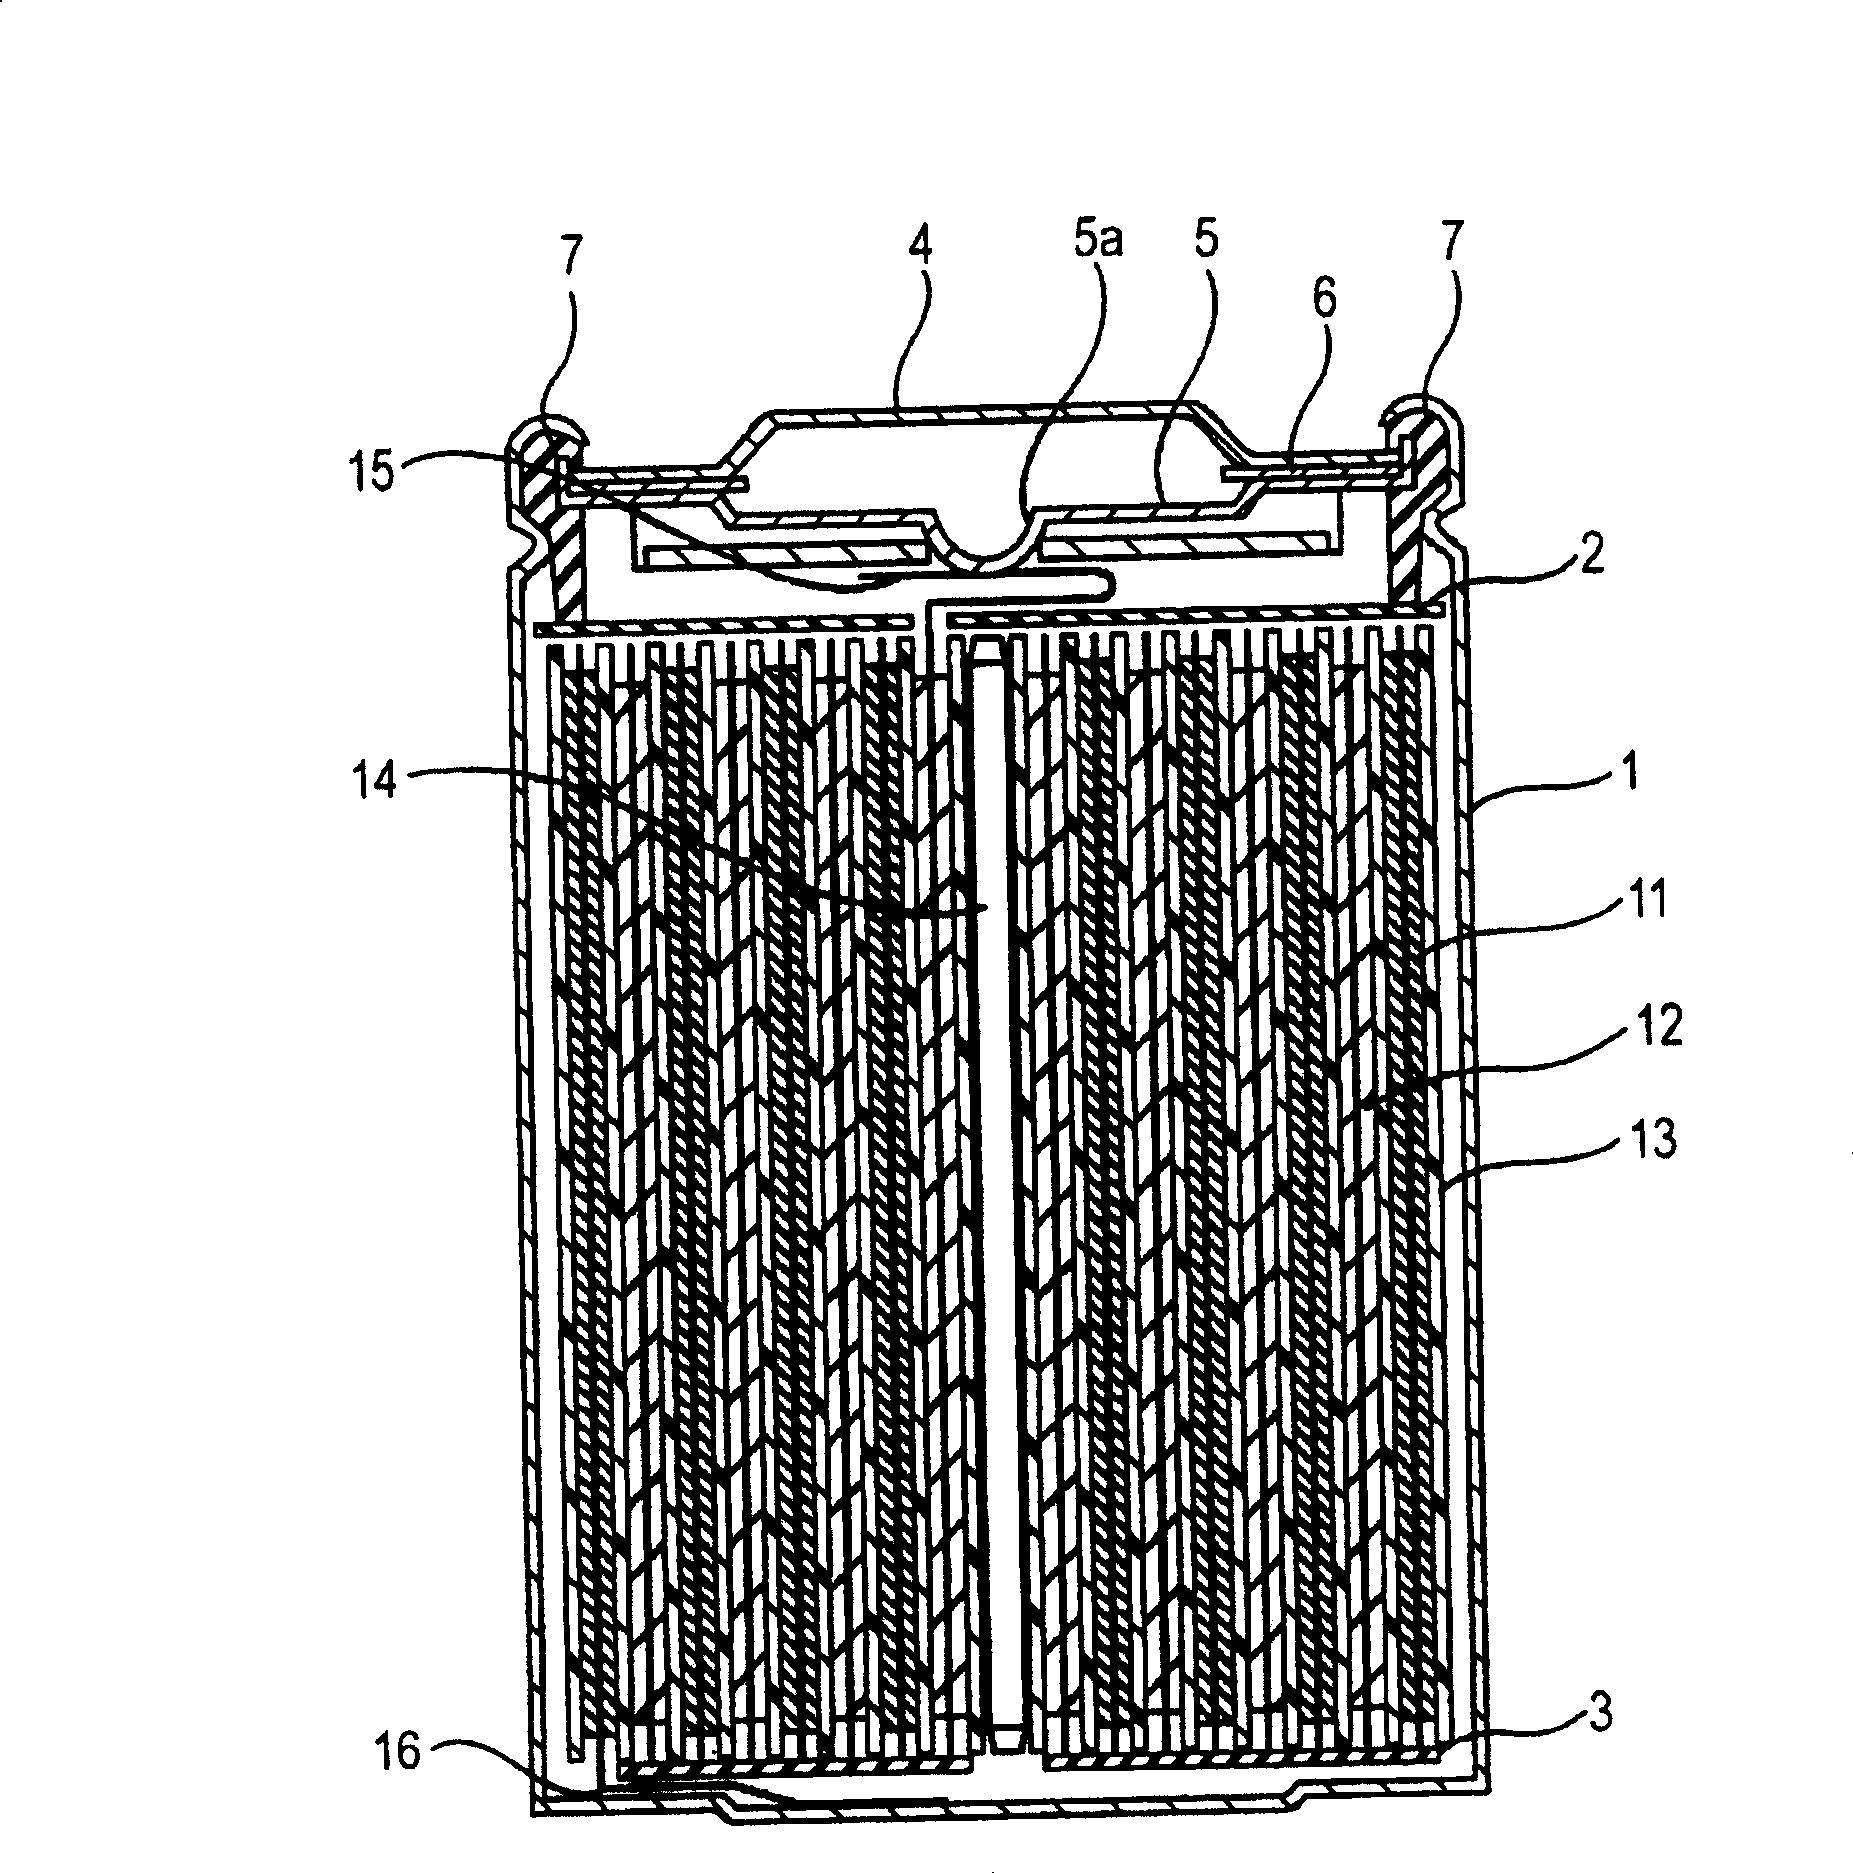 Powder graphite and non-water electrolyte secondary cell